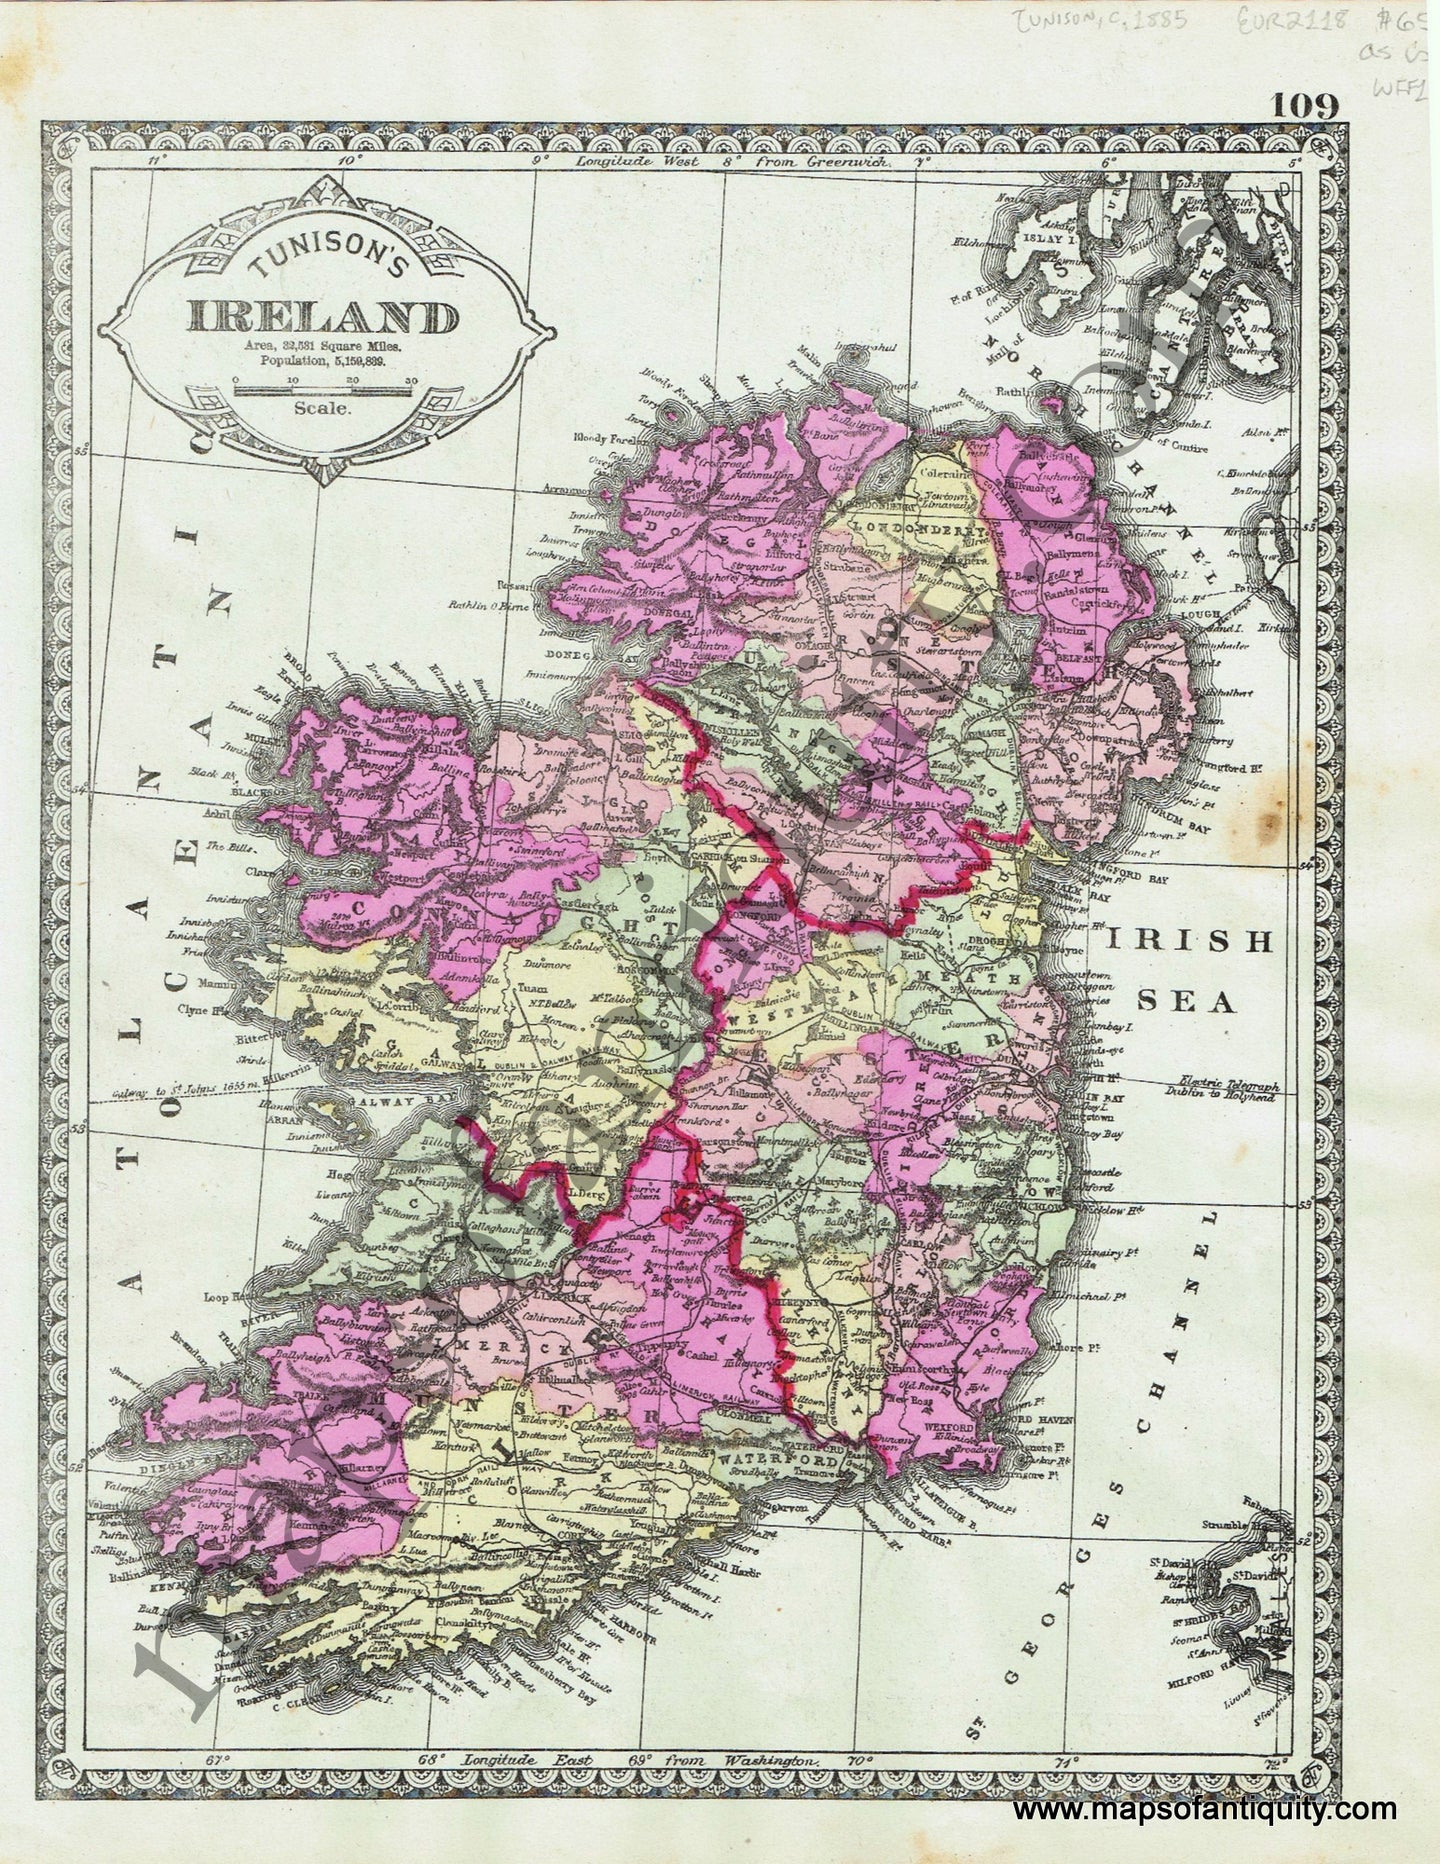 Antique-Hand-Colored-Map-Tunison's-Ireland-verso:-Tunison's-France-******-Europe-Ireland-France-c.-1885-Tunison-Maps-Of-Antiquity